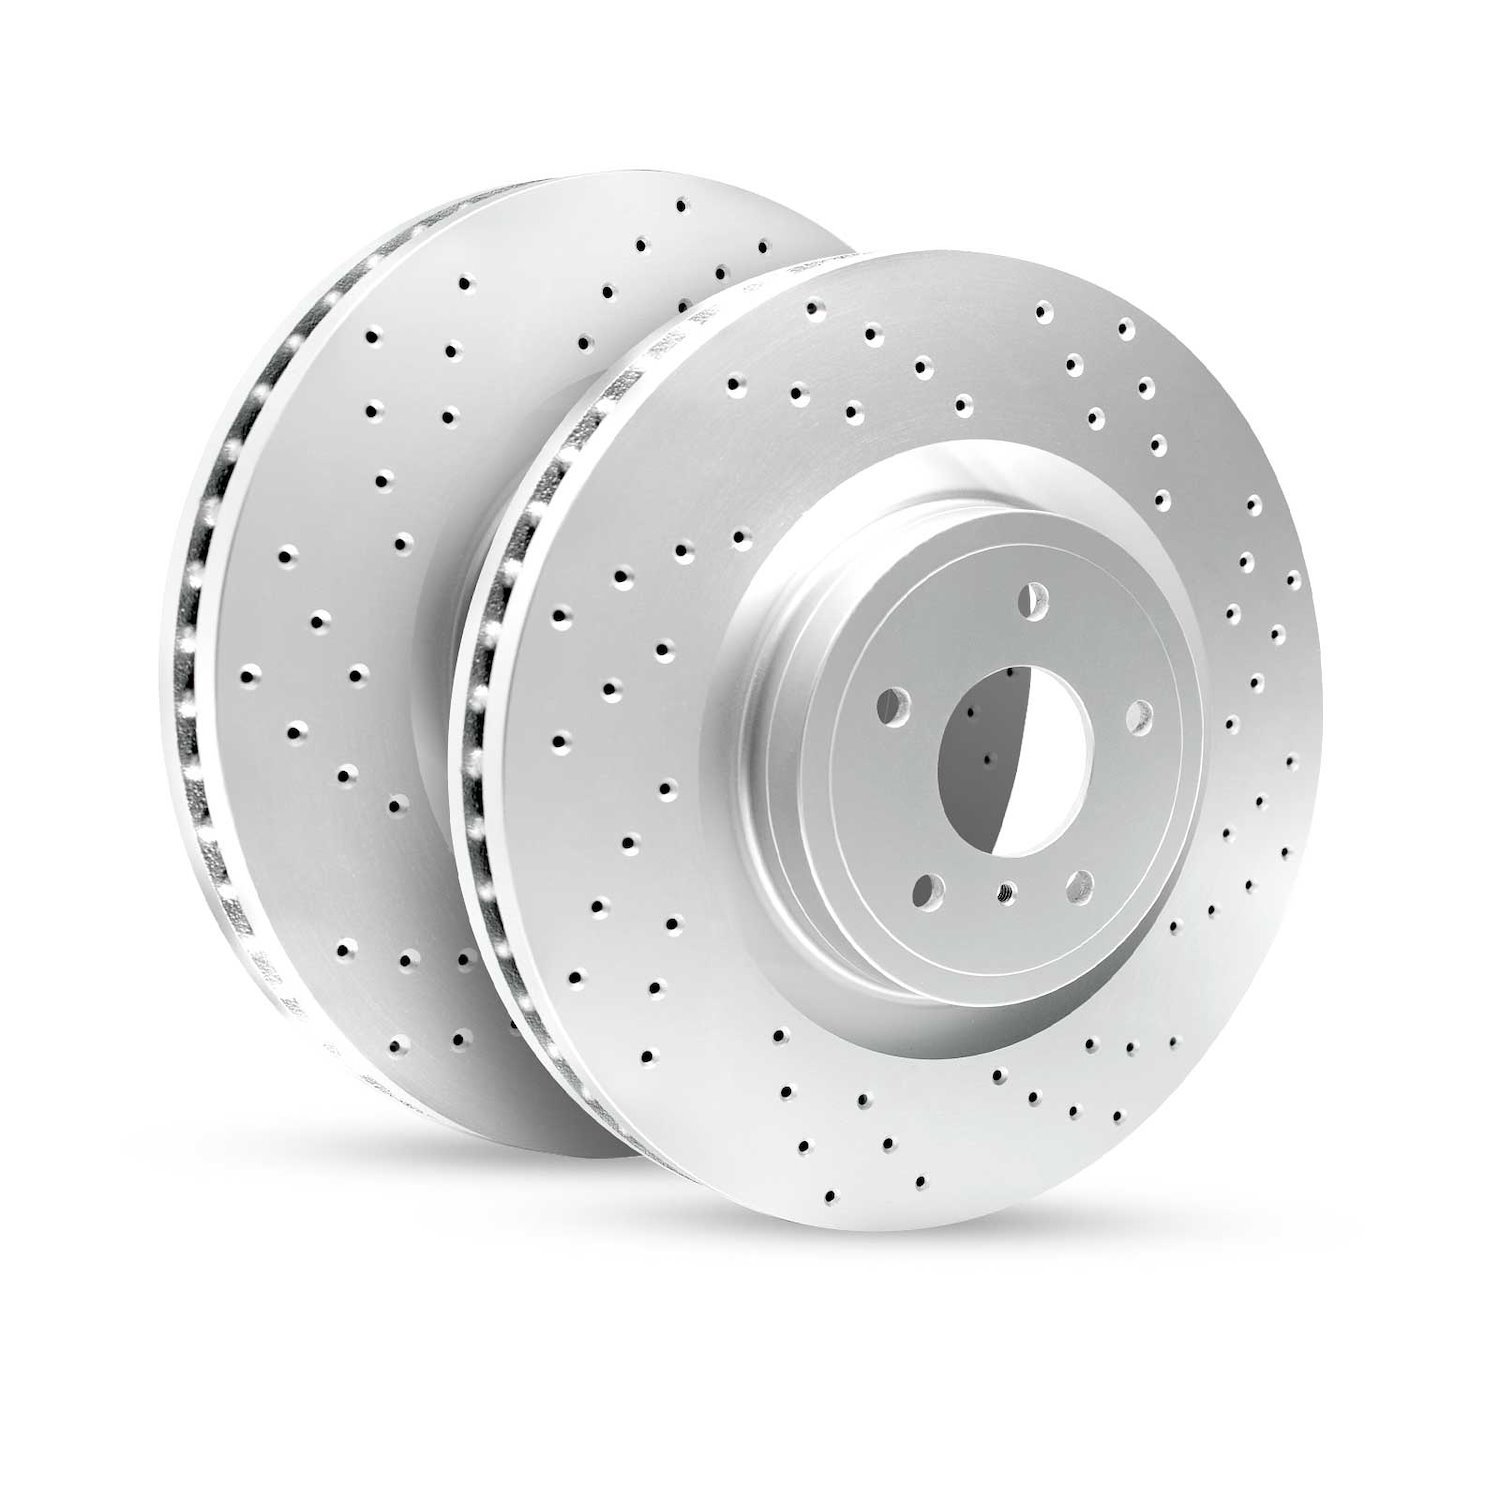 GEO-Carbon Drilled/Slotted Rotors, Fits Select Tesla, Position: Rear